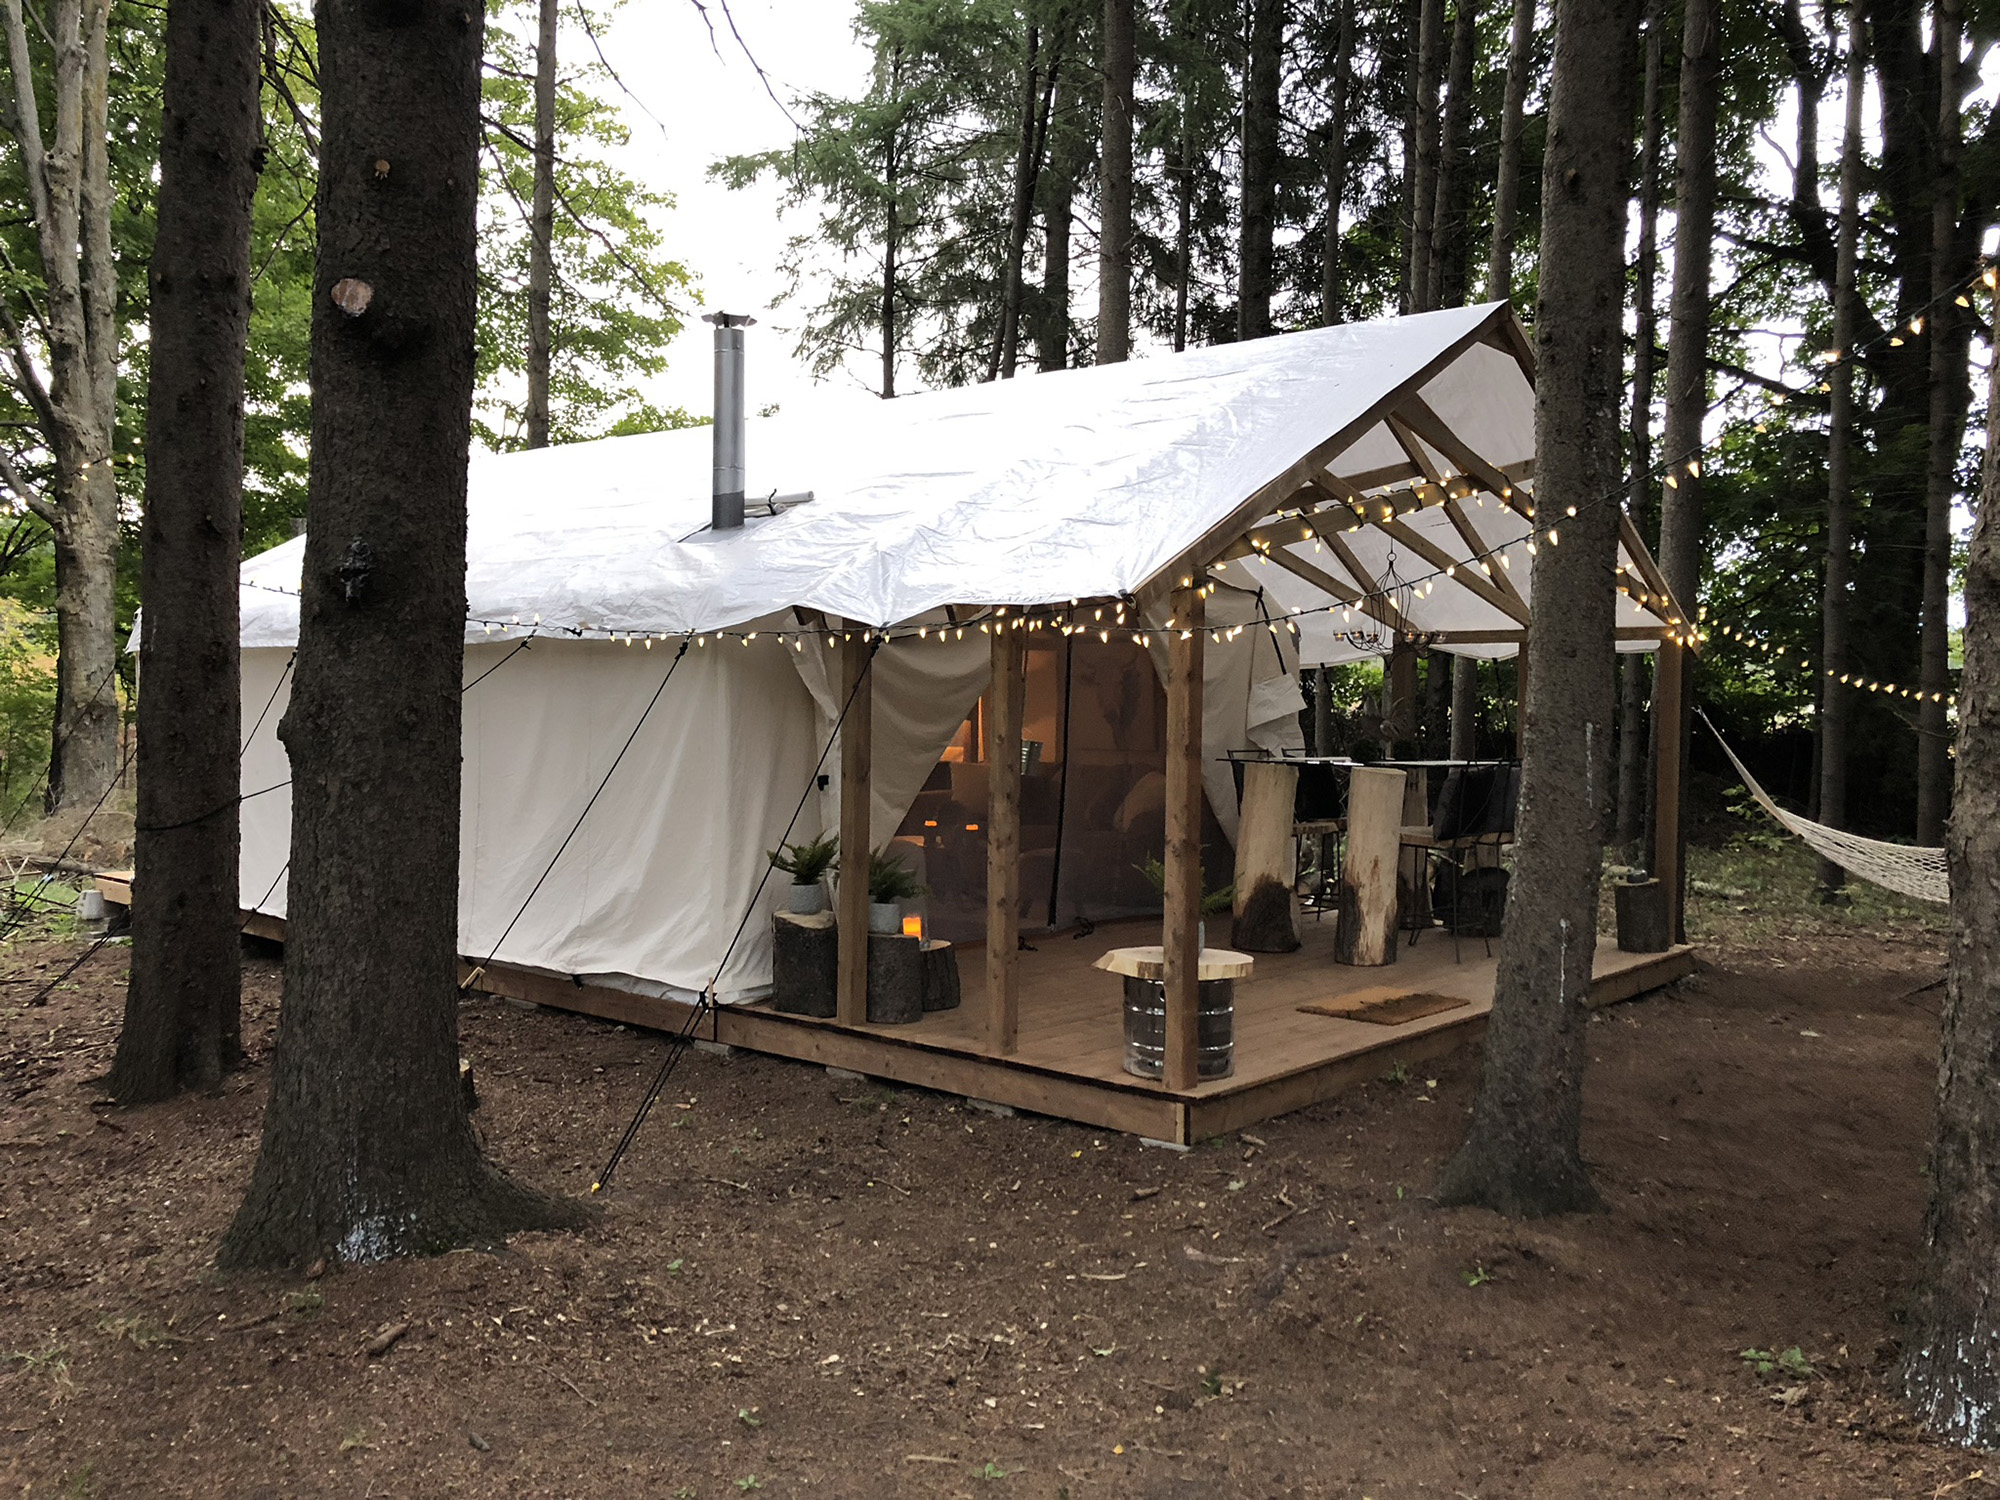 Glamping Ontario - tent with twinkly lights